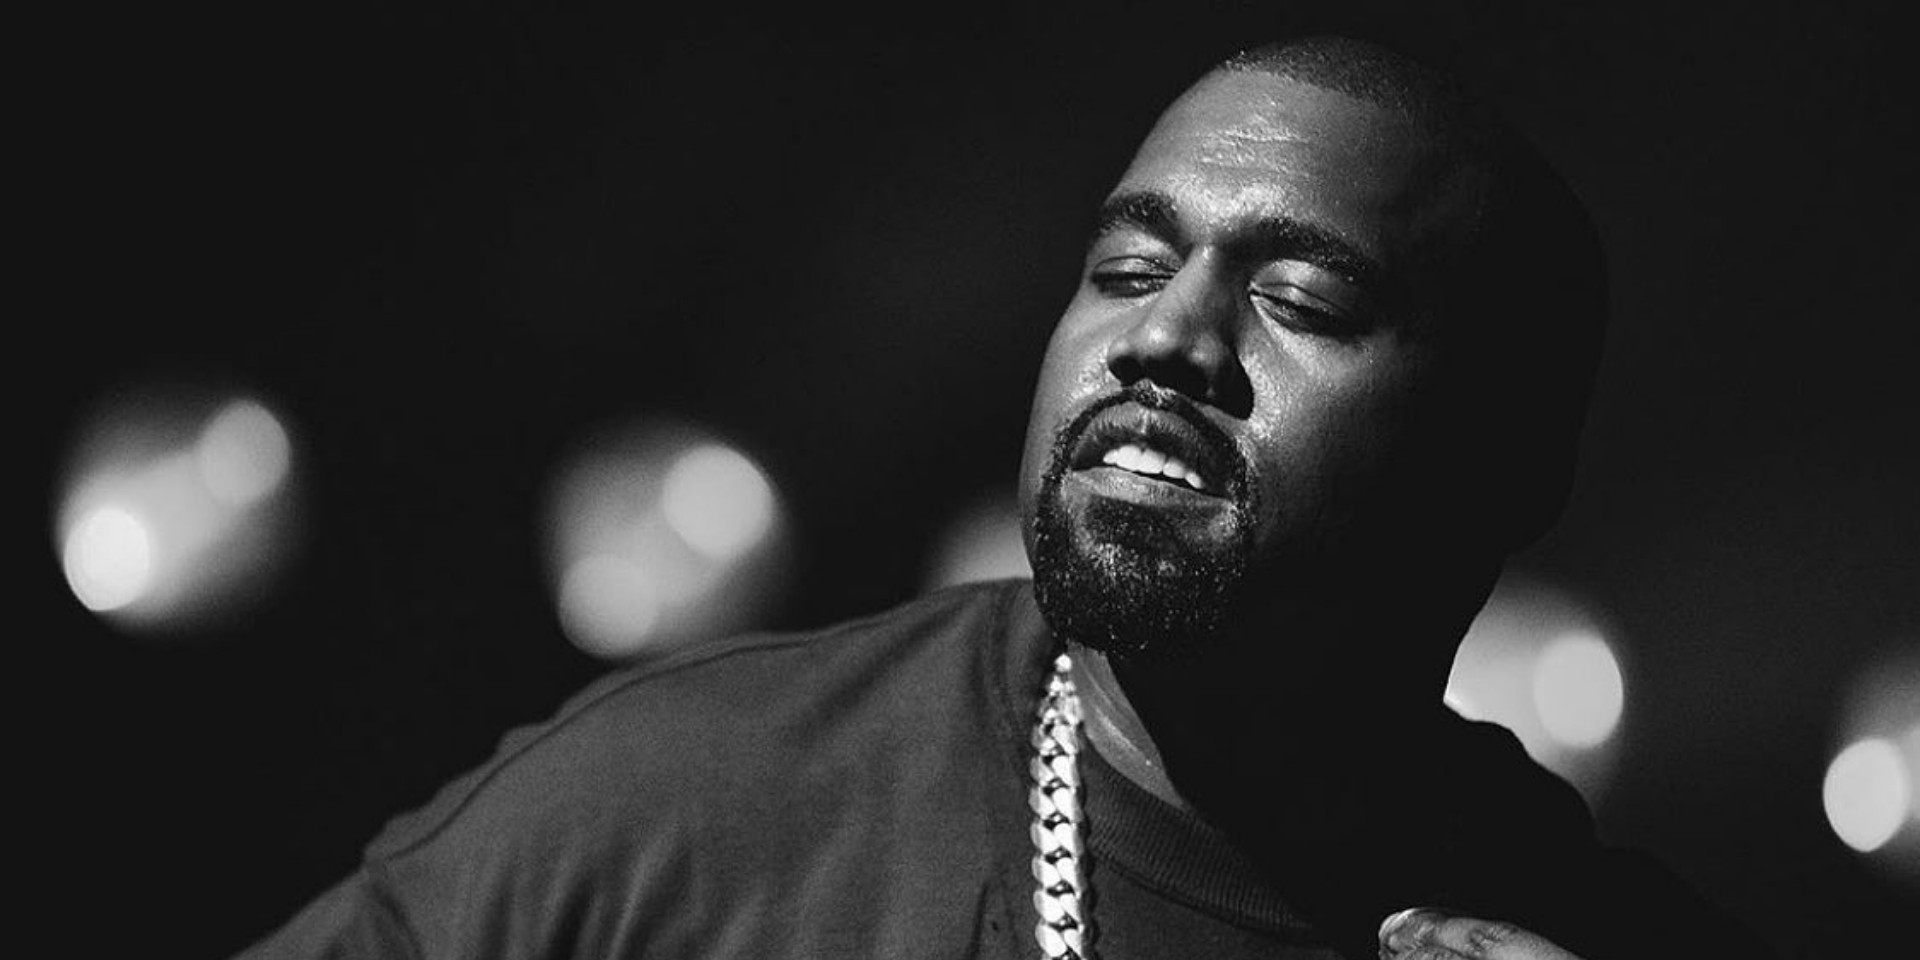 Kanye West does another livestream for new album 'DONDA', reveals features from The Weeknd, Kid Cudi, Playboi Carti and more